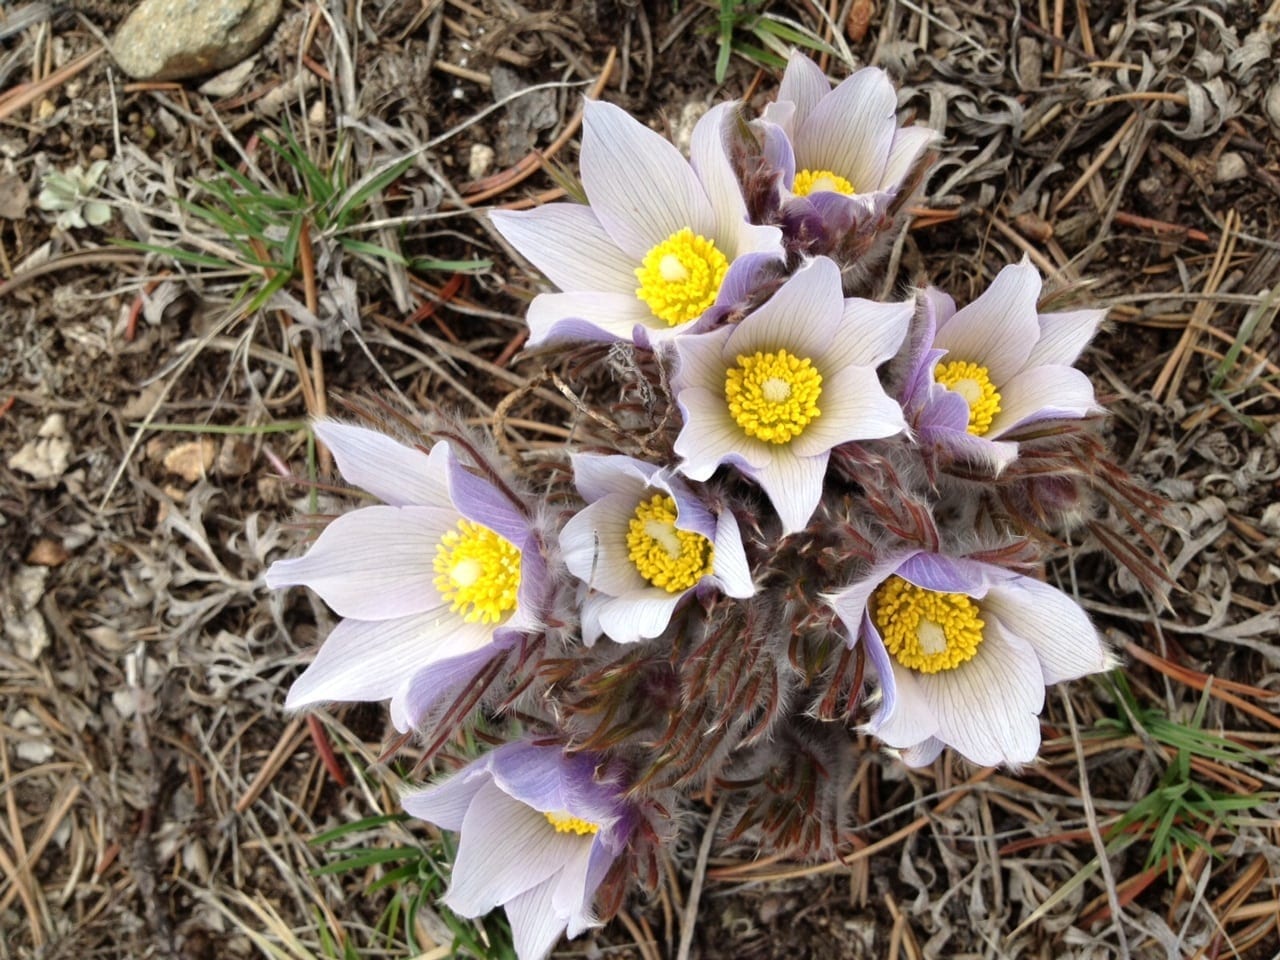 Pasqueflower:  purple on the outside, white on the inside, this is one of the earliest bloomers. Can be found in Breckenridge’s Valley Brook Cemetery.